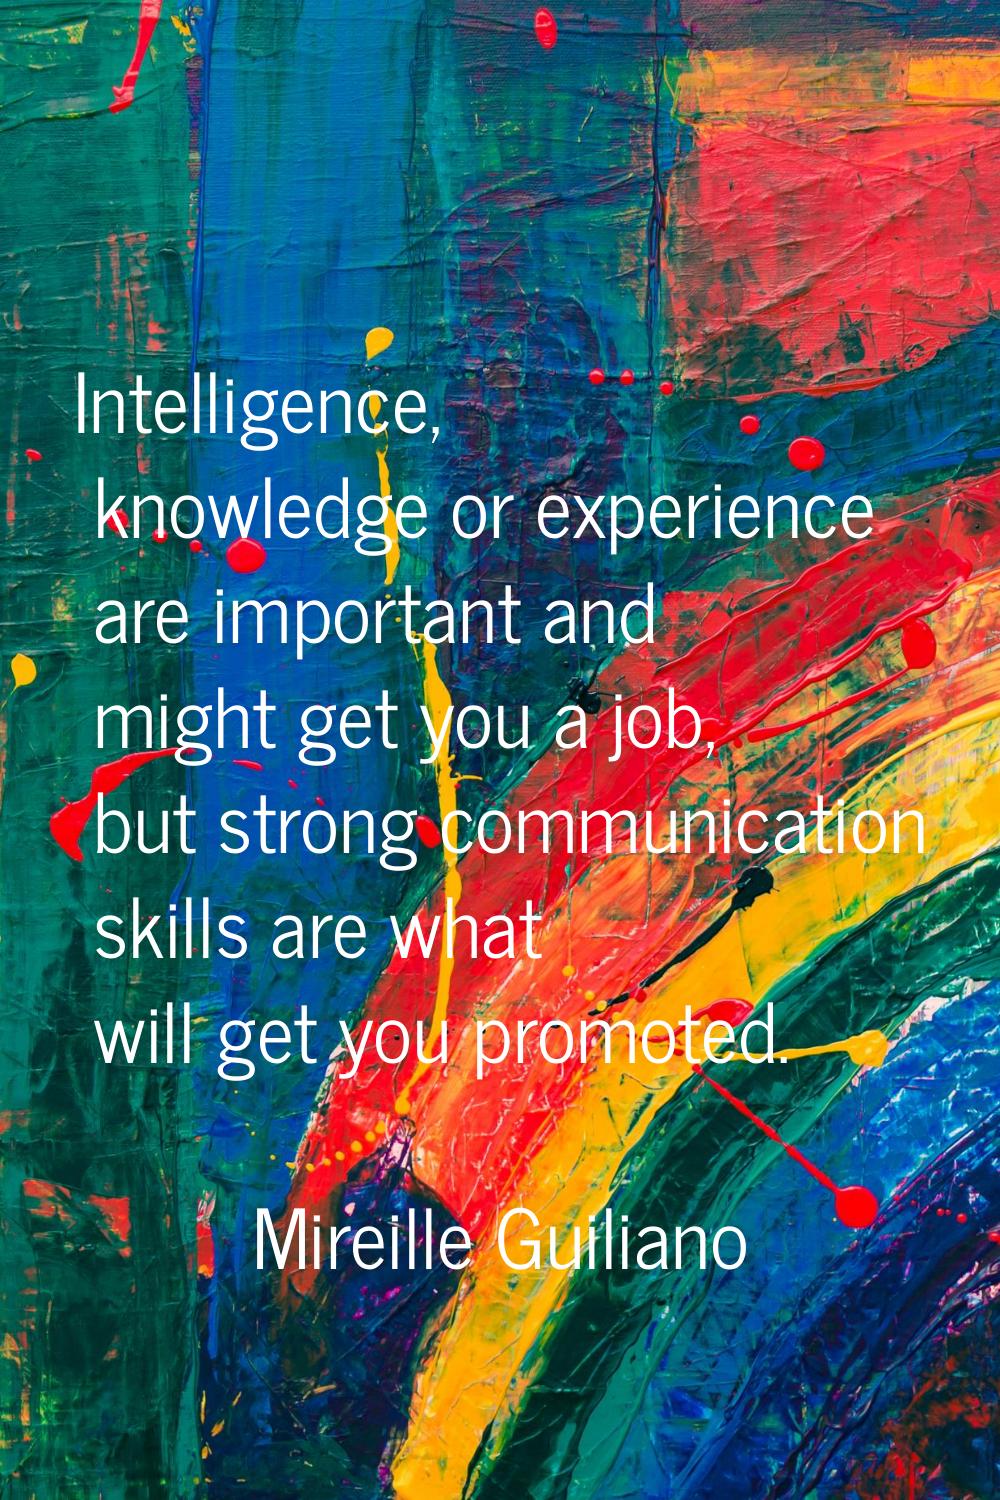 Intelligence, knowledge or experience are important and might get you a job, but strong communicati